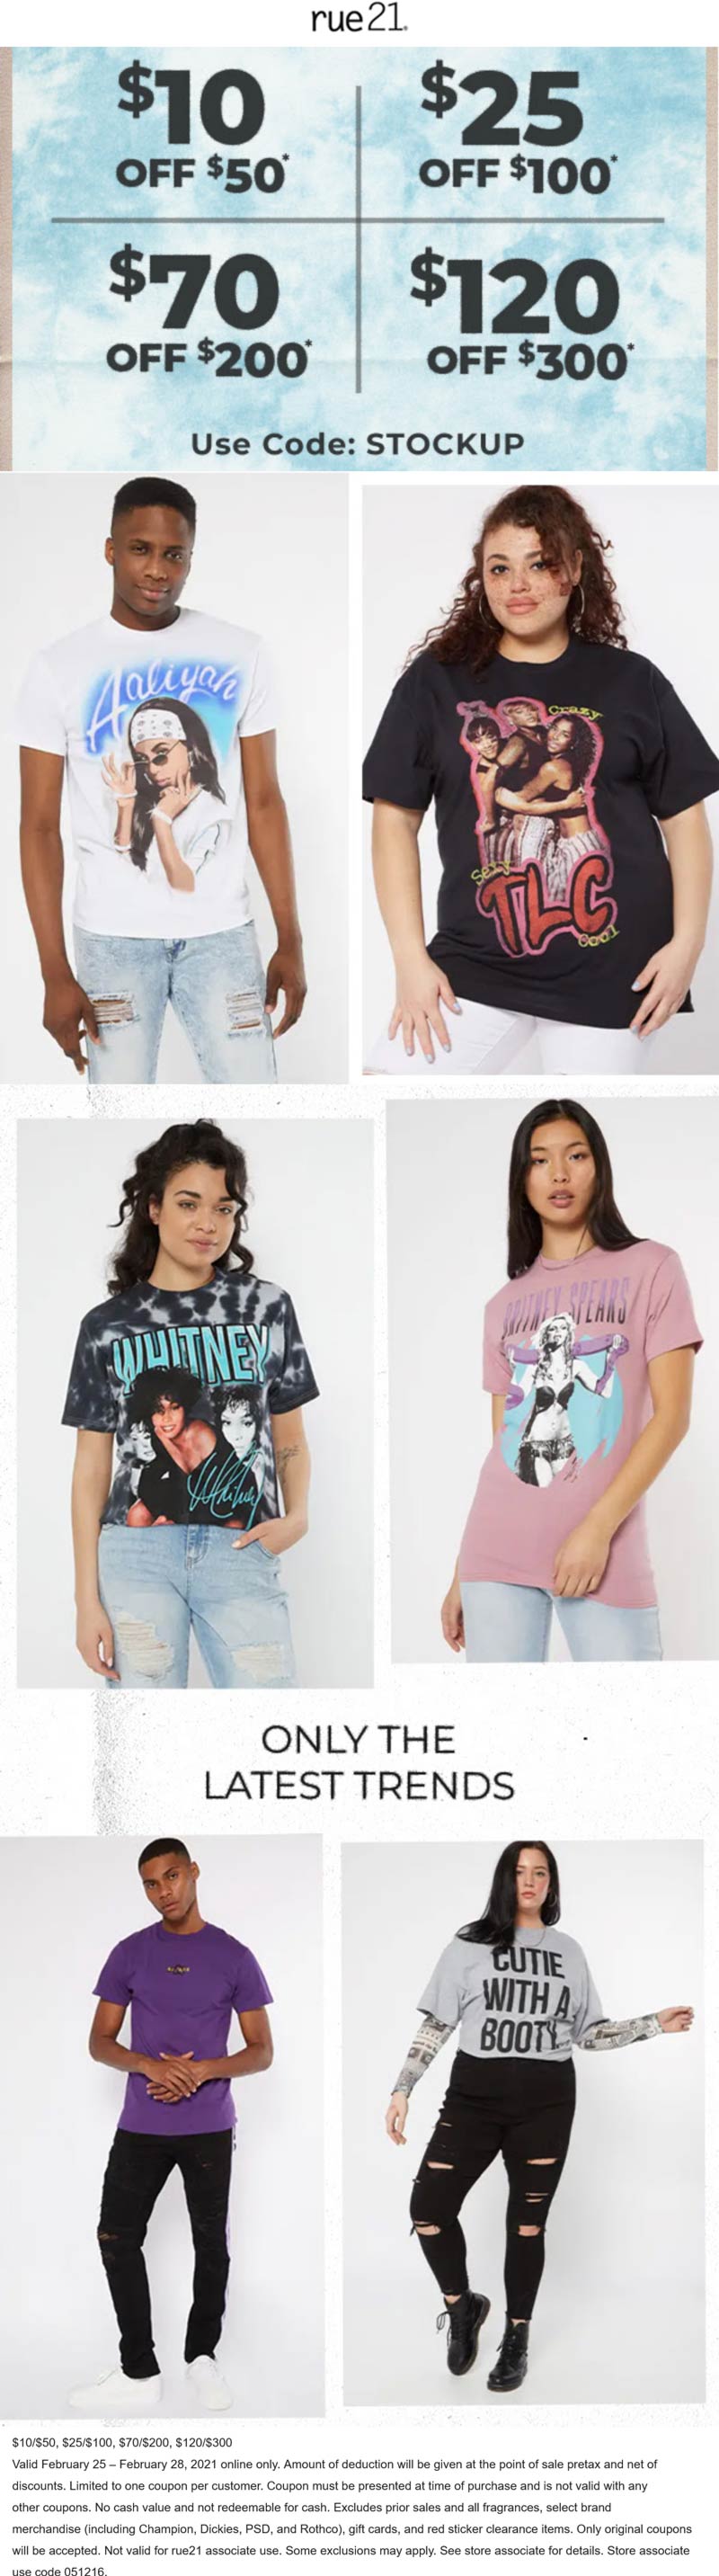 rue21 stores Coupon  $10 off $50 & more today online at rue21 via promo code STOCKUP #rue21 